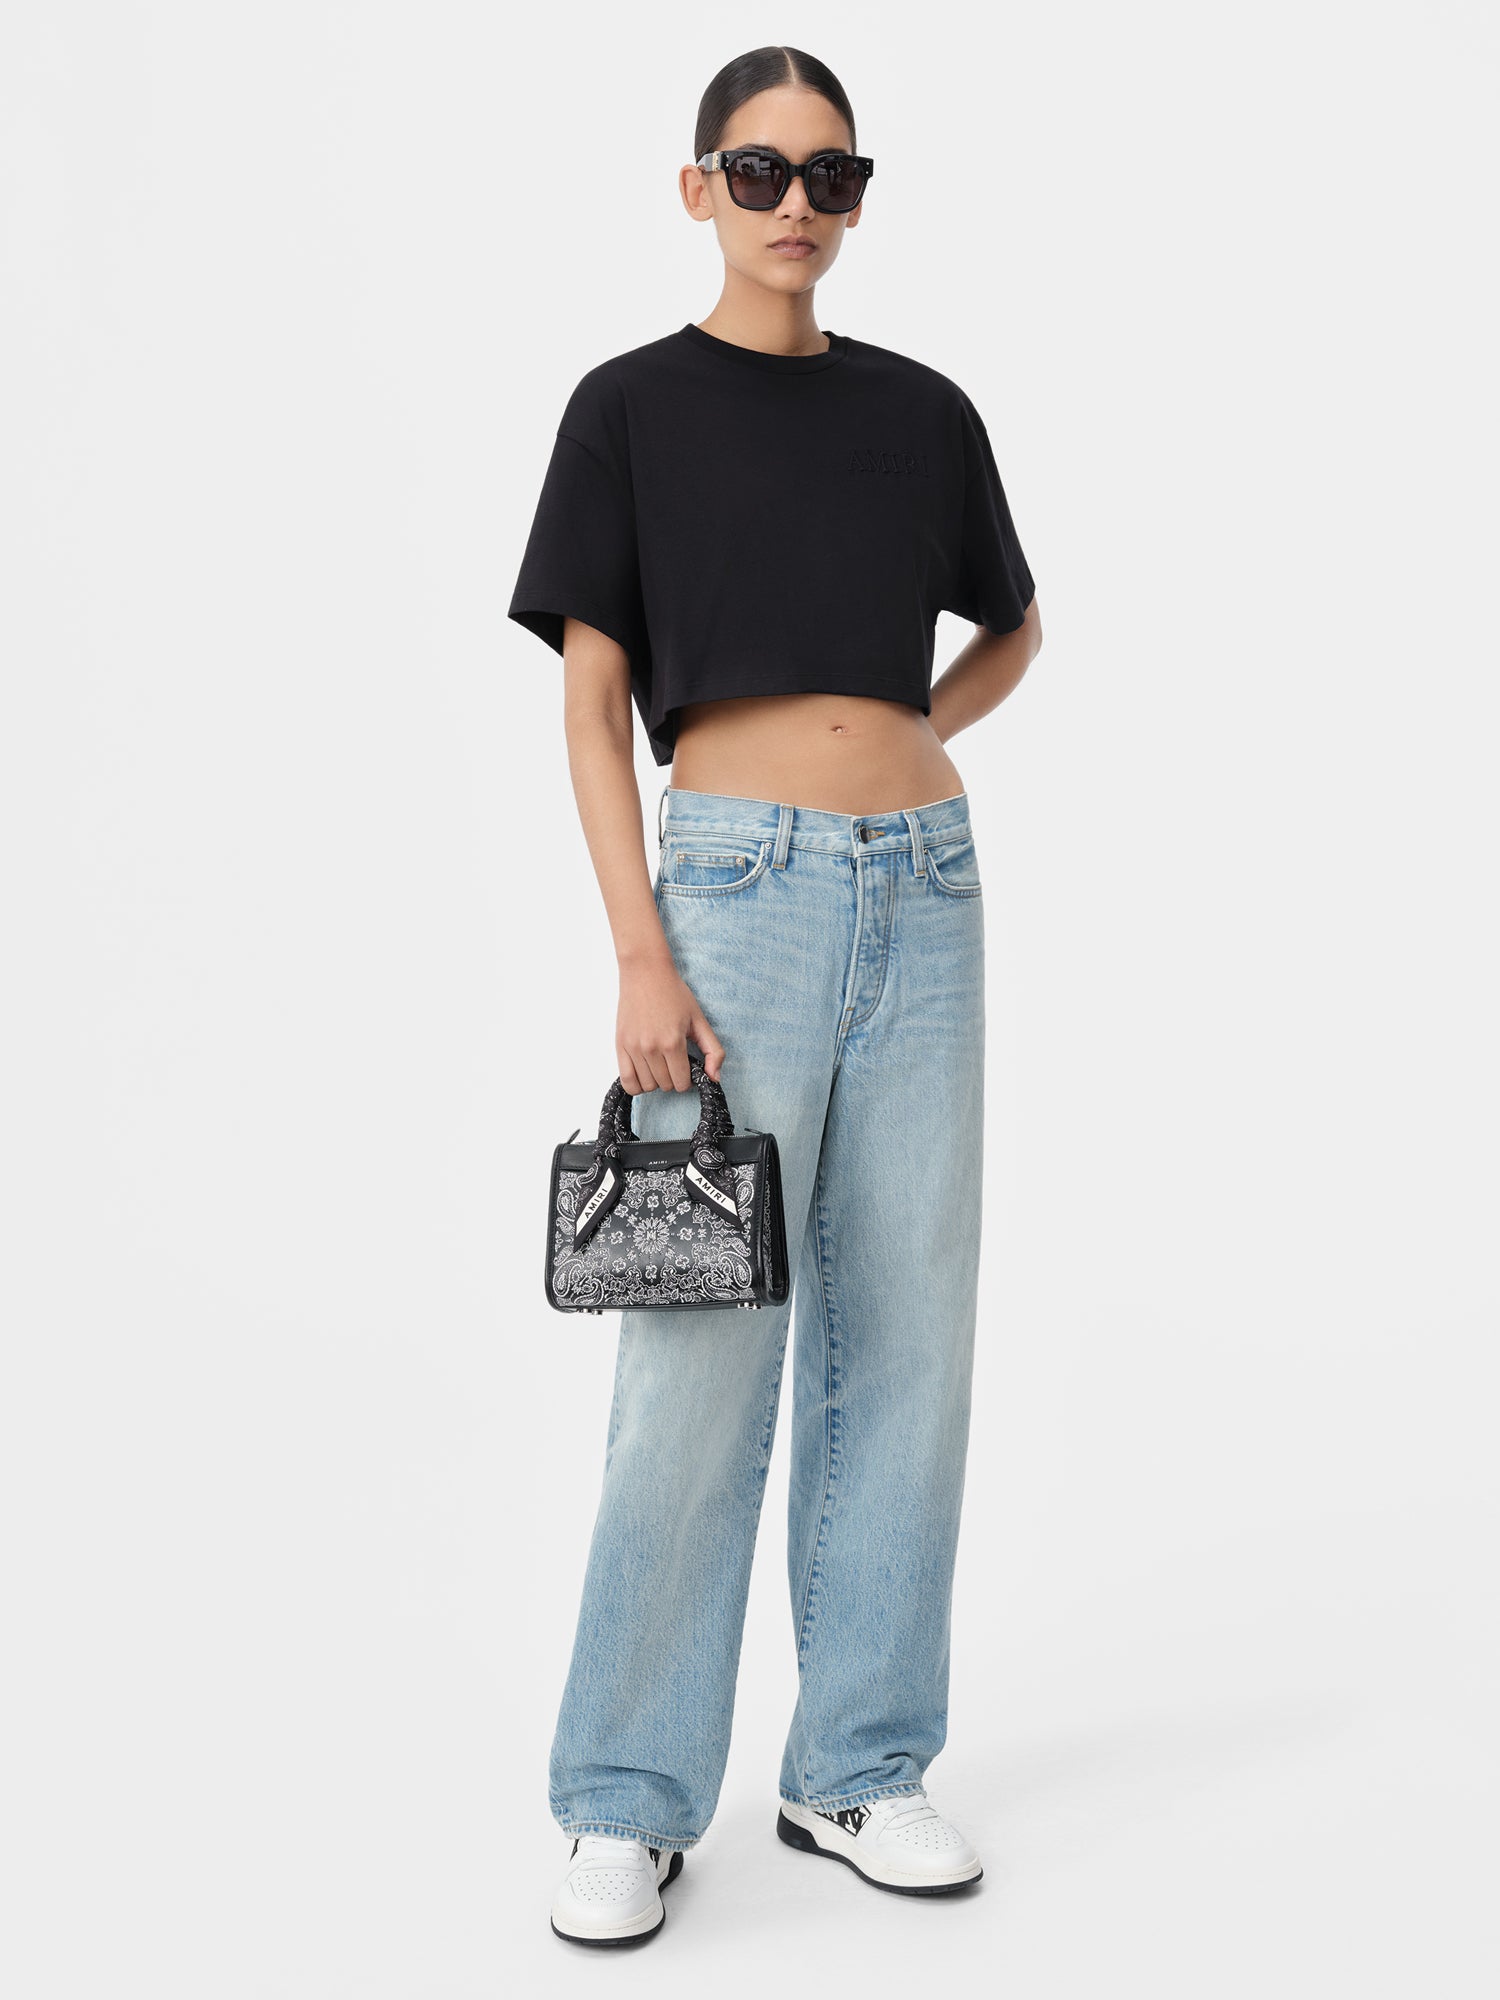 Product WOMEN - WOMEN'S AMIRI EMBROIDERED CROPPED TEE - Black featured image